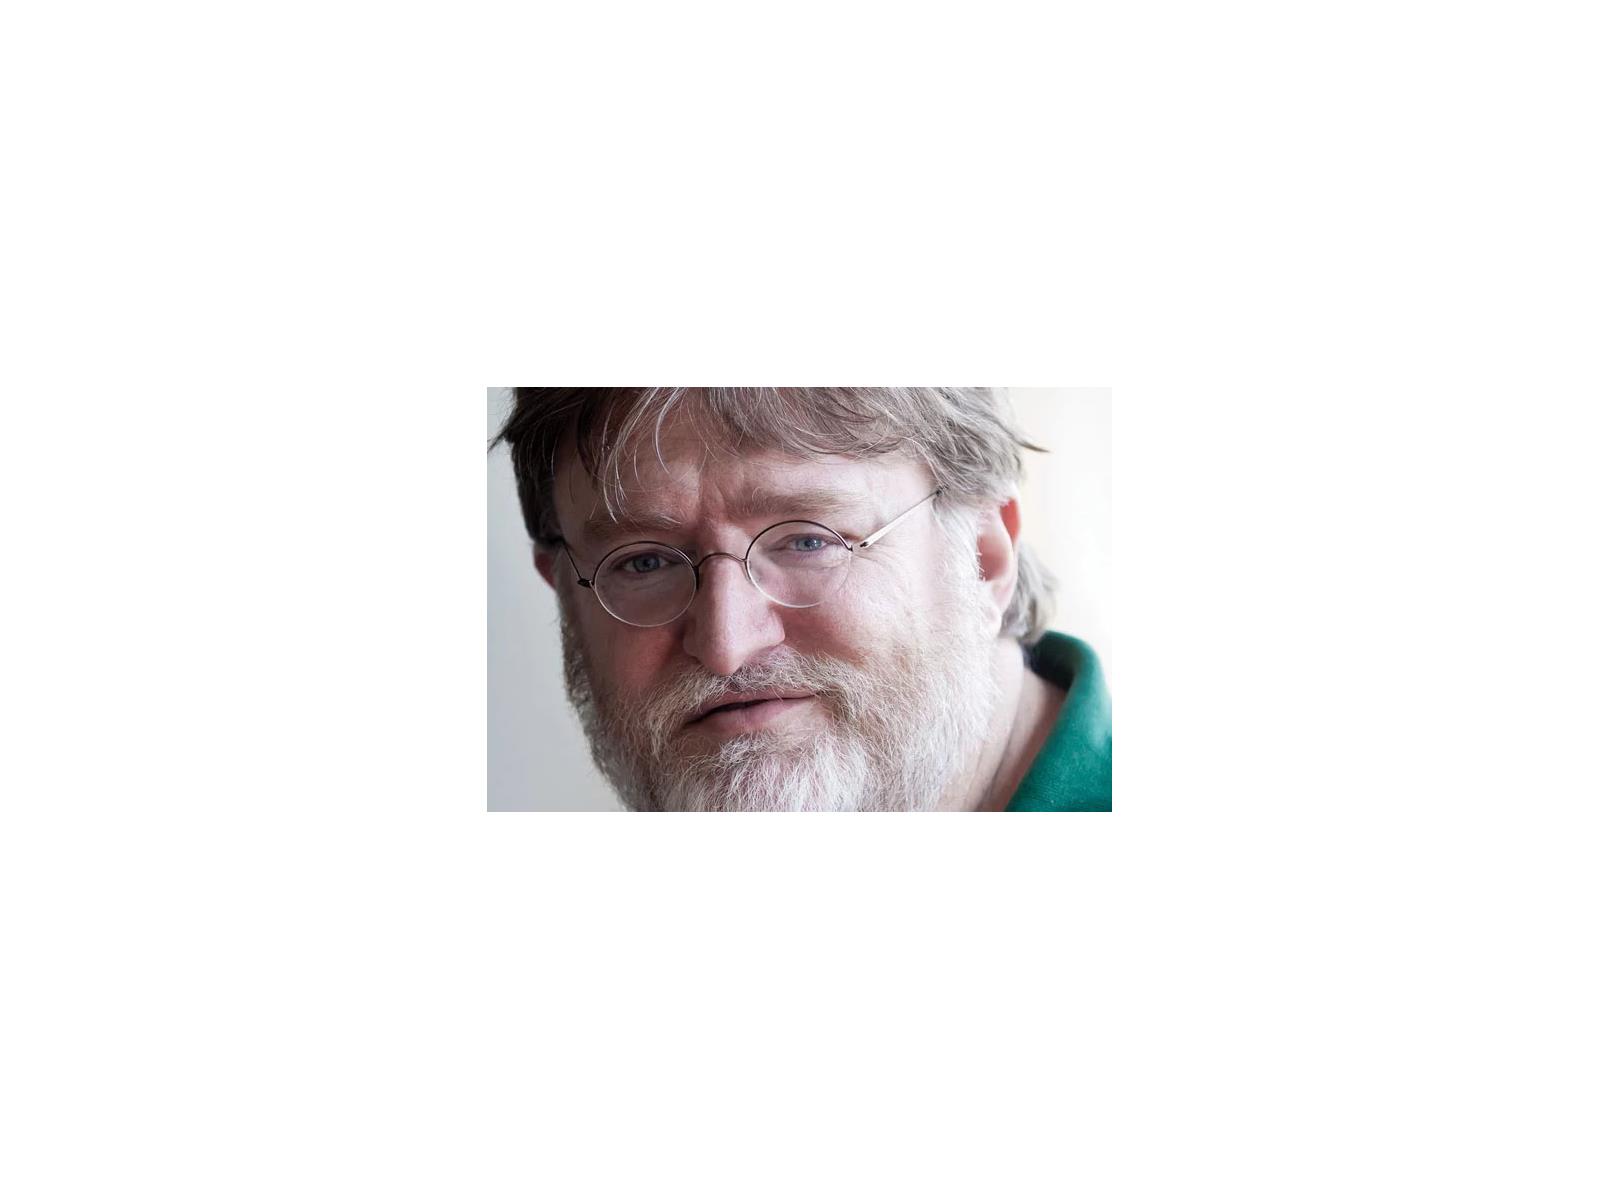 Gabe Newell trusts Microsoft after Call of Duty commitment to